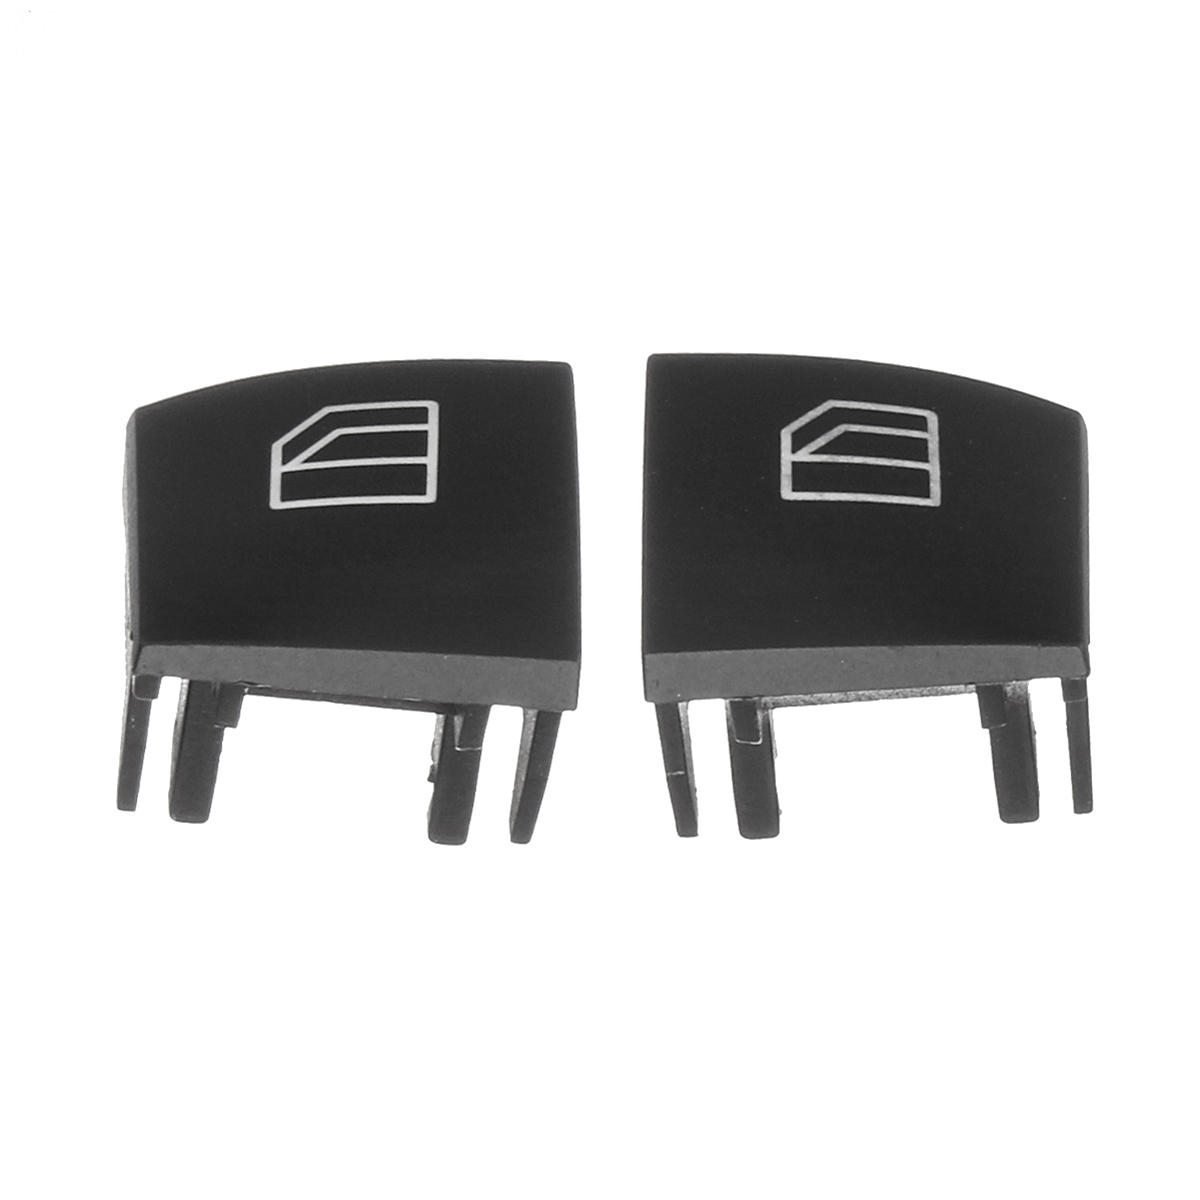 

Master Window Switch Repair Button Cap Left &Right Pair for Mercedes ML GL R Class W164 X164 W251